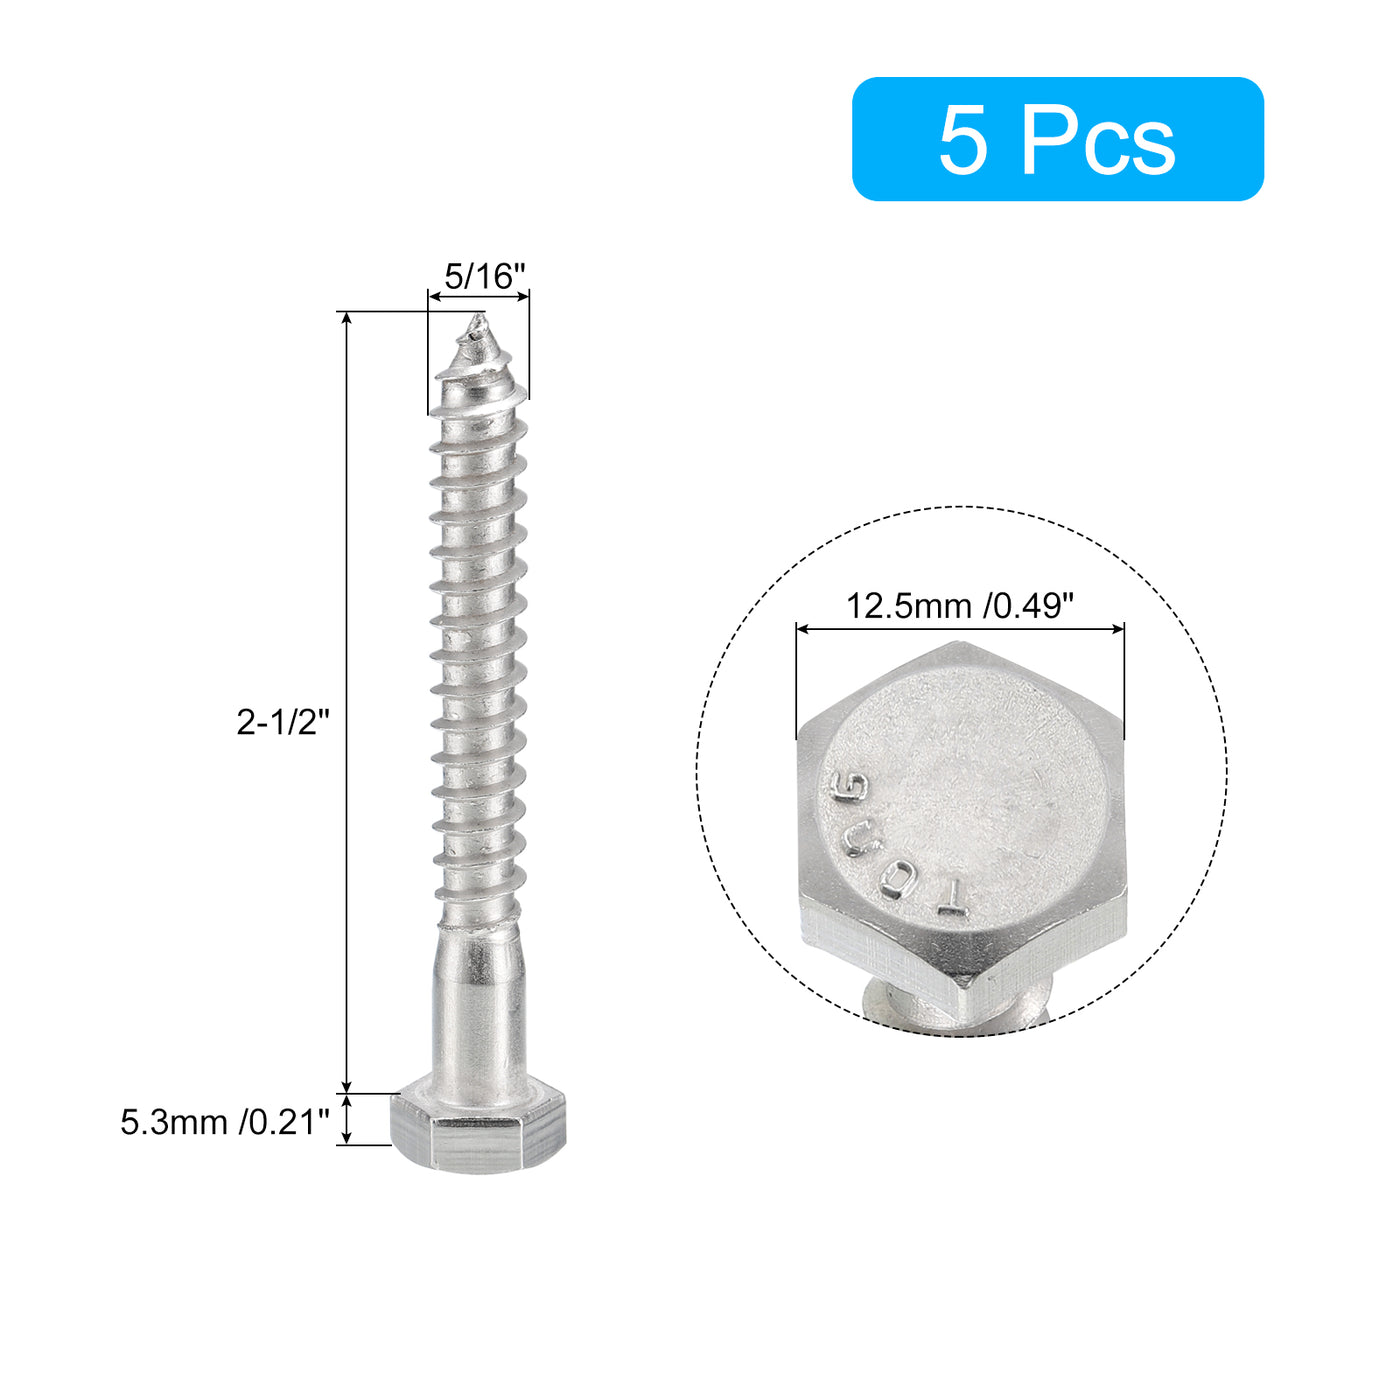 uxcell Uxcell Hex Head Lag Screws Bolts, 5pcs 5/16" x 2-1/2" 304 Stainless Steel Wood Screws